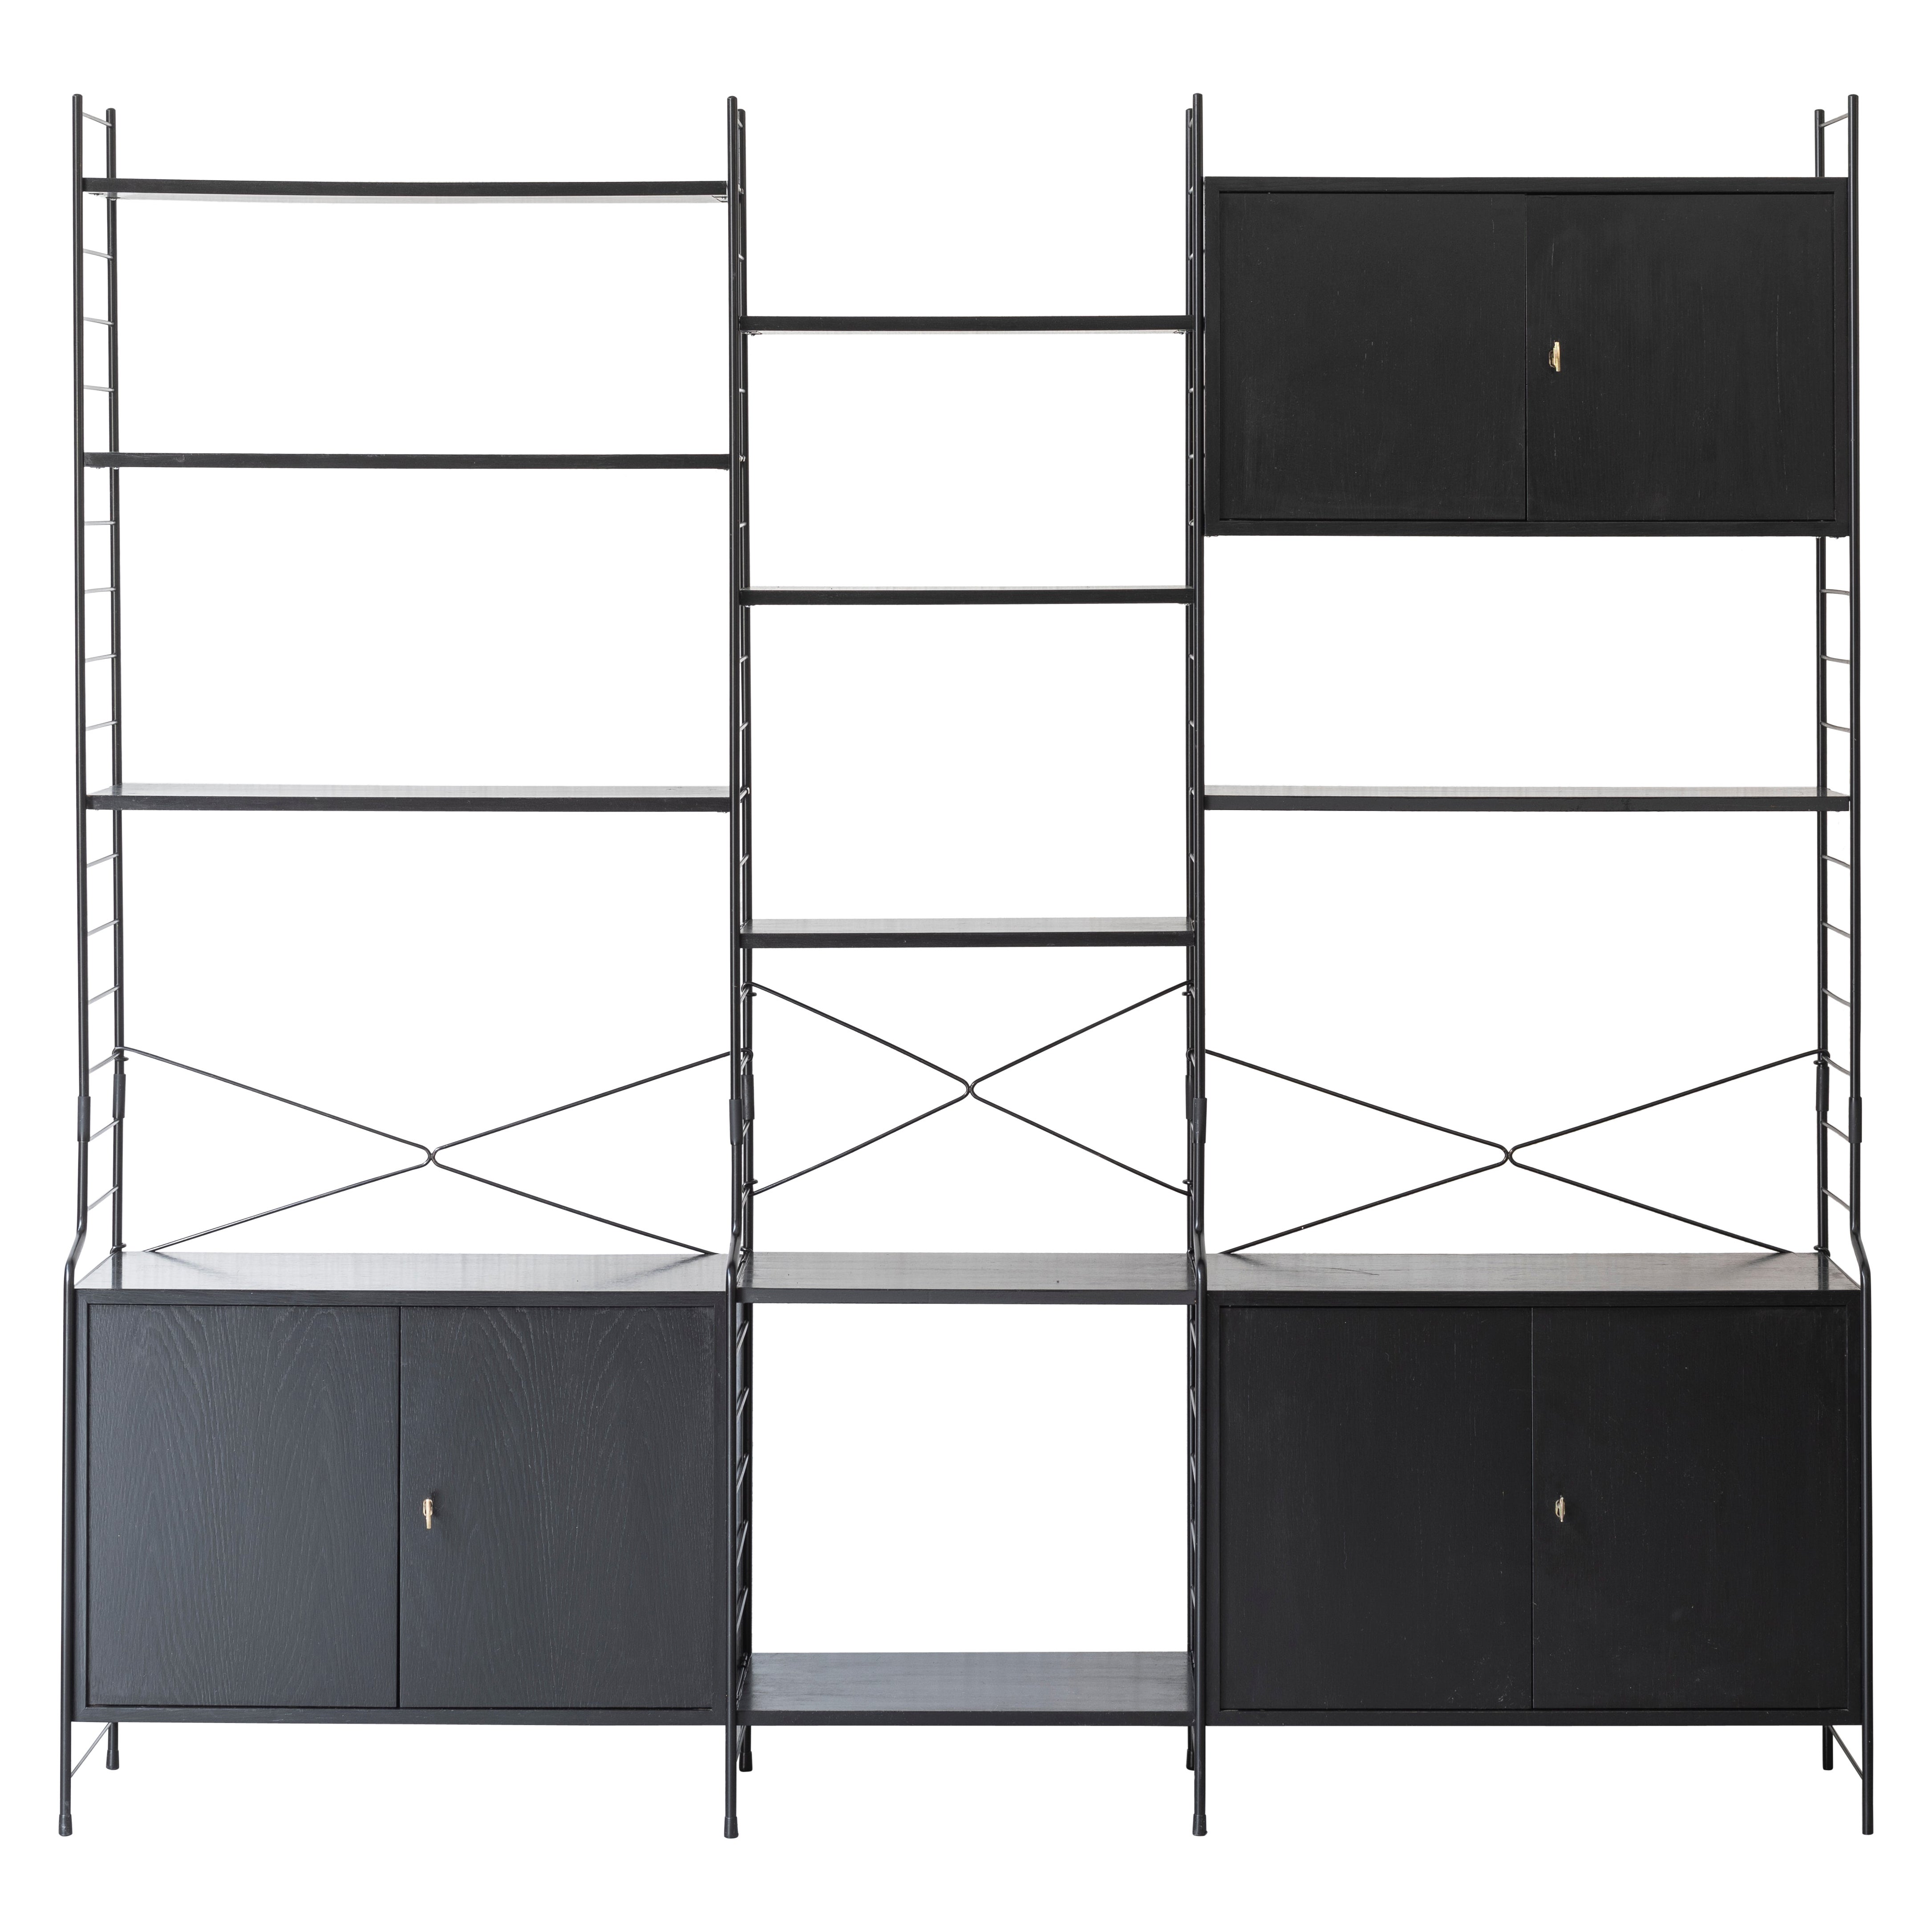 WHB 3-Bay Shelving System in black, Germany, 1960s For Sale